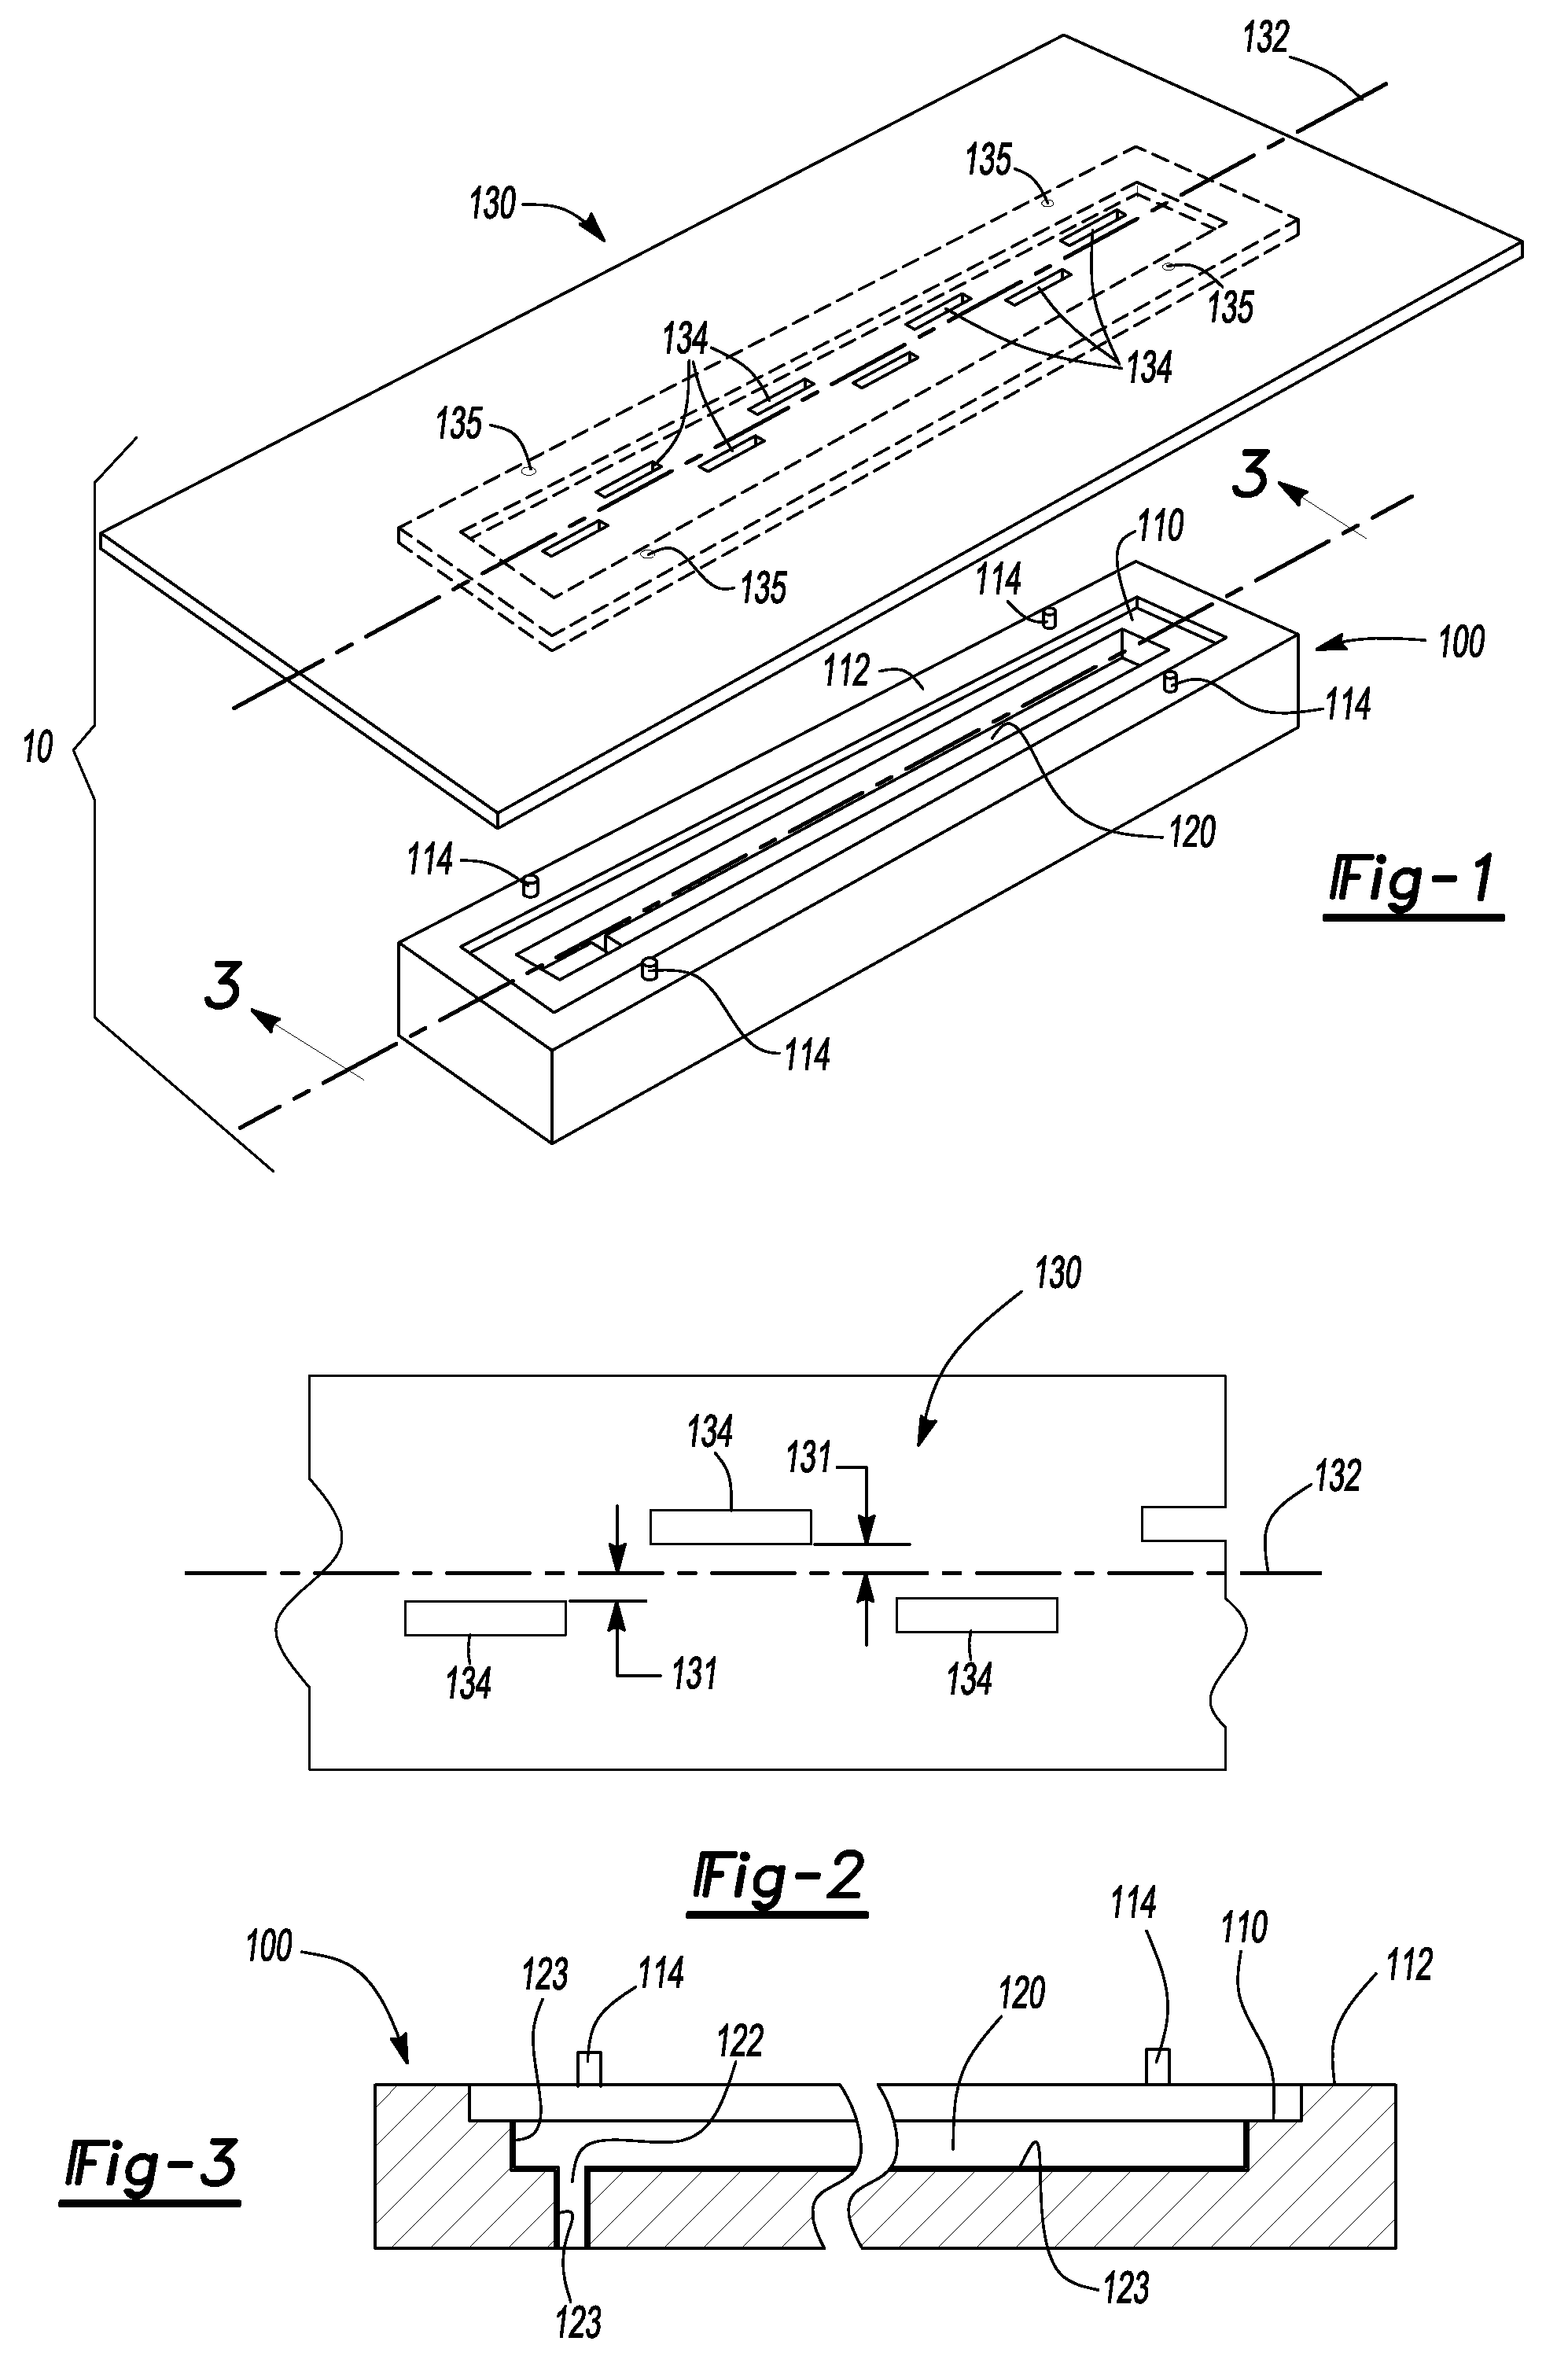 Plastic waveguide slot array and method of manufacture